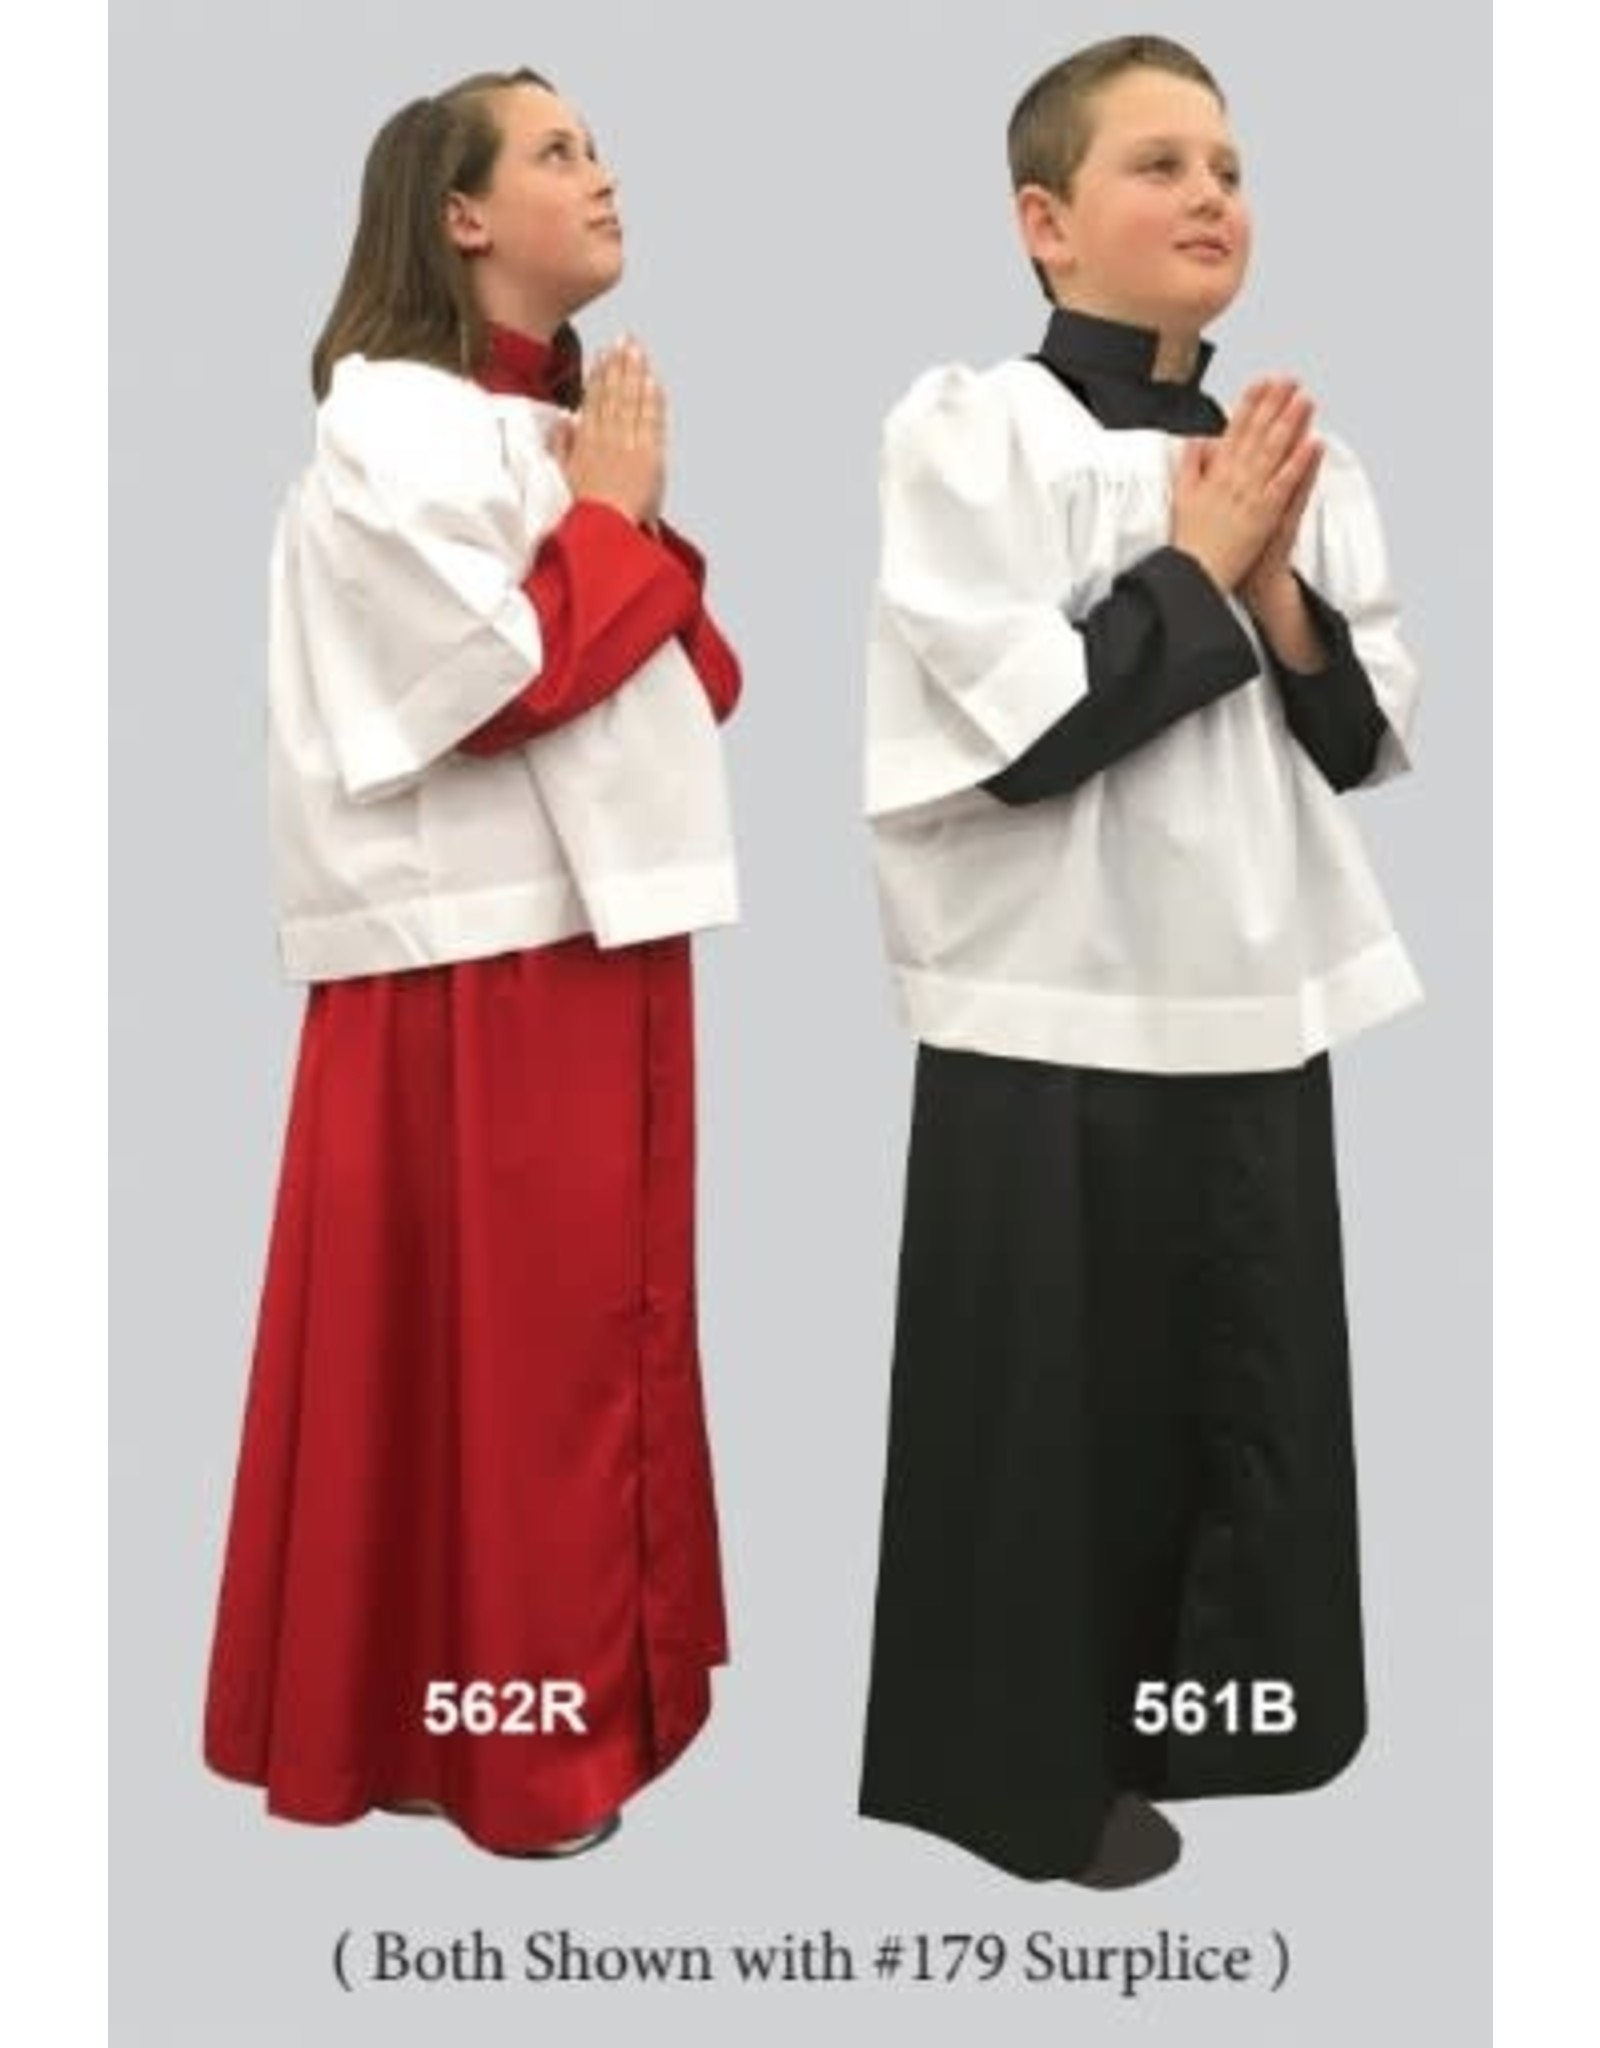 Altar Server Cassock - Available in Red or Black